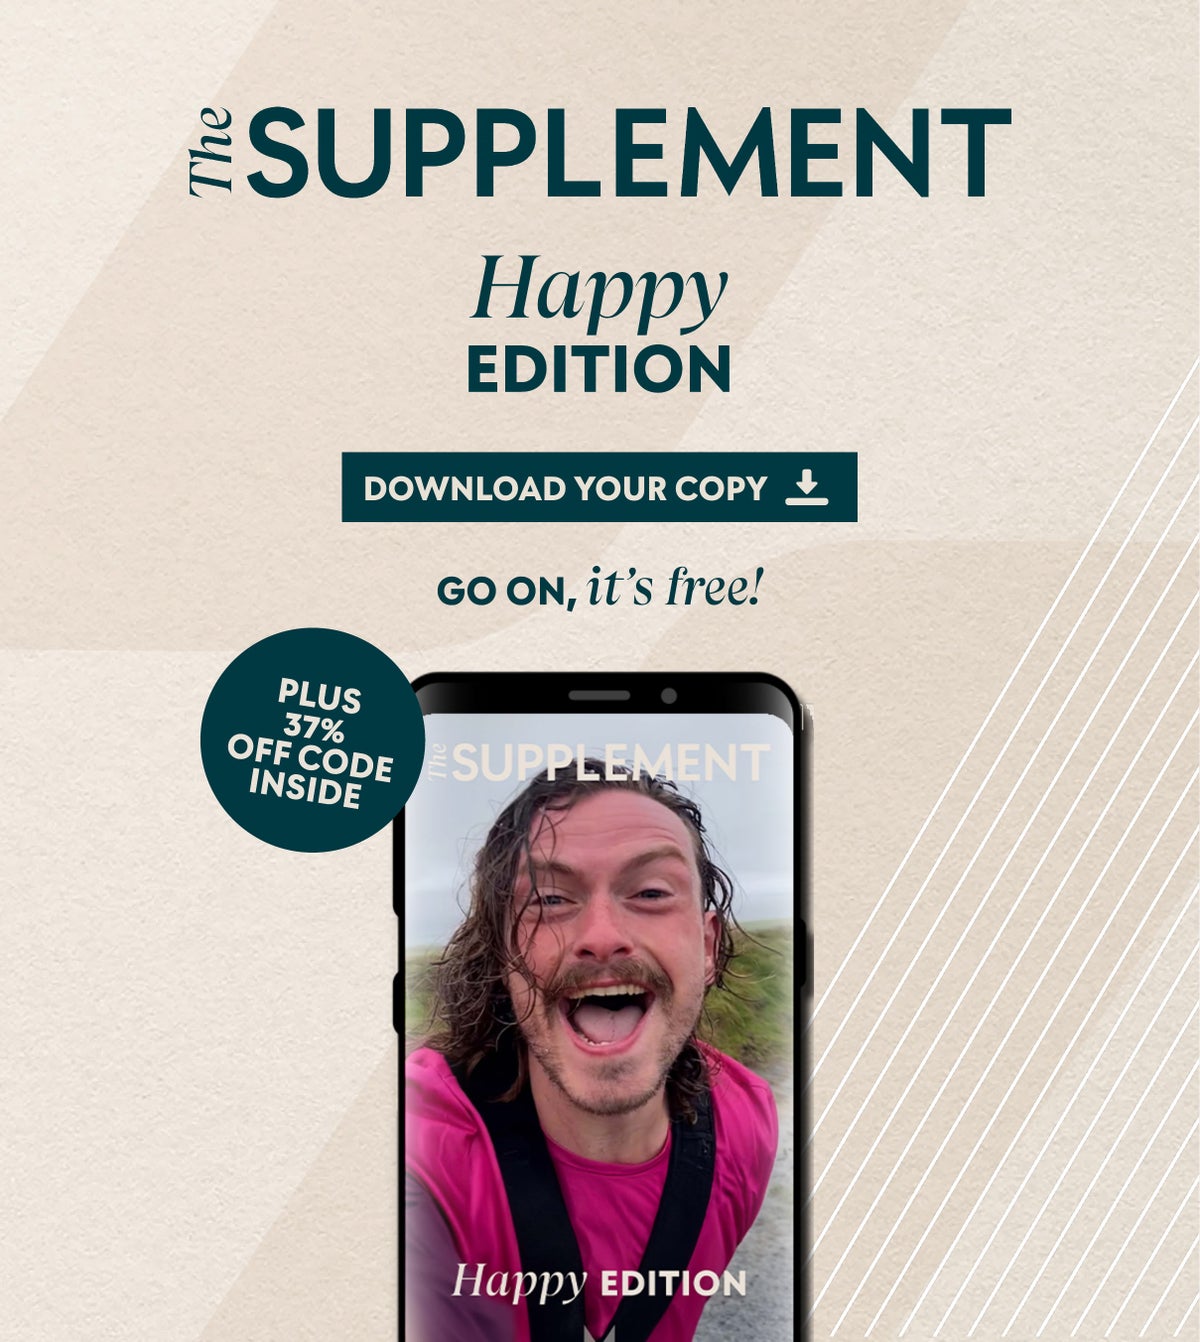 The Supplement. Transformation edition, download your copy today (plus receive a 37% off code inside).